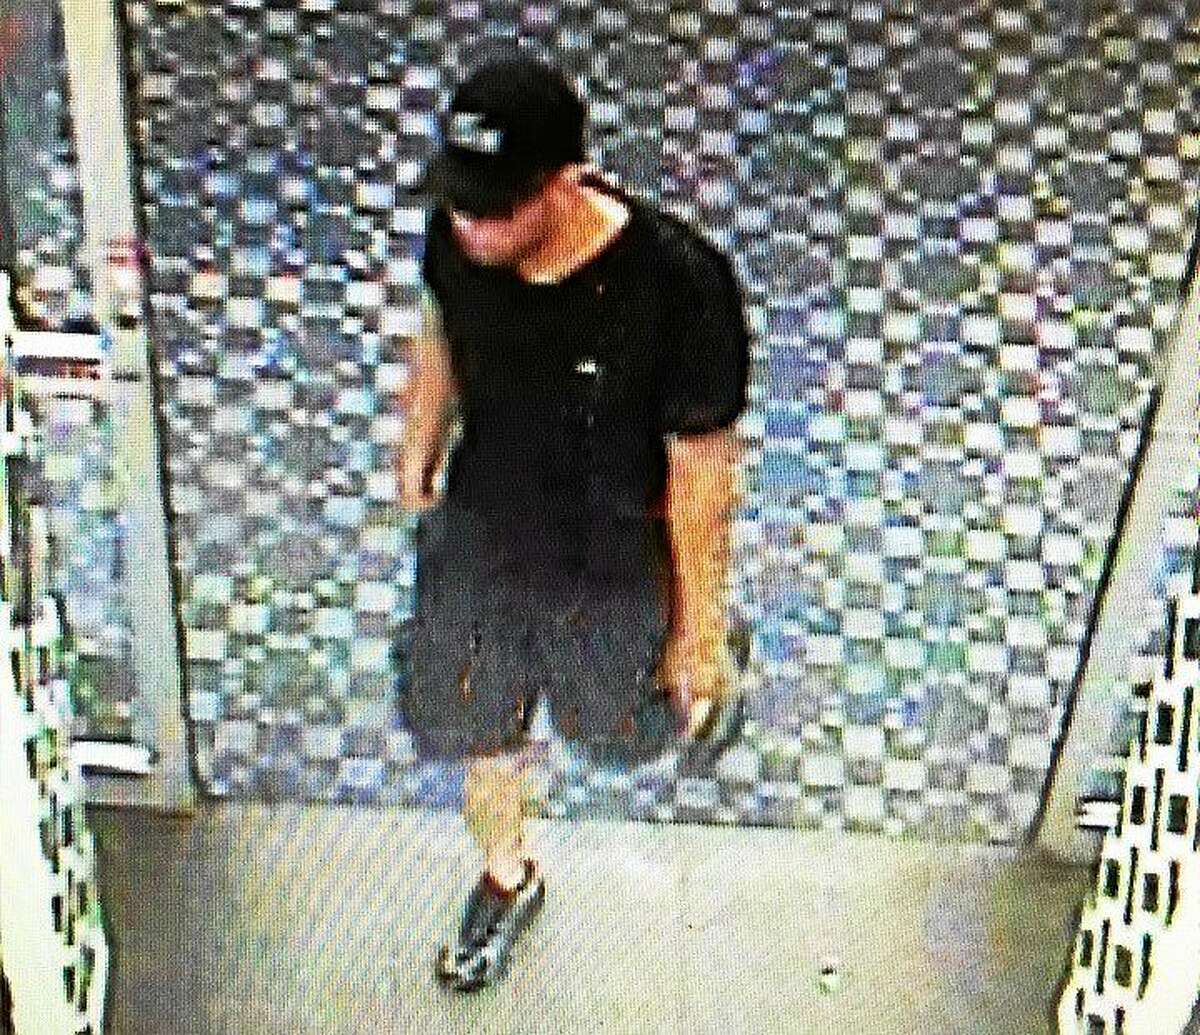 (Photo courtesy of the Clinton Police Department) Police in Clinton are looking for a man who used a stolen credit card to make more than $2,000 in purchases at stores in Clinton and Waterford. Police said the suspect's vehicle appears to be a white Suzuki Kizashi sedan.